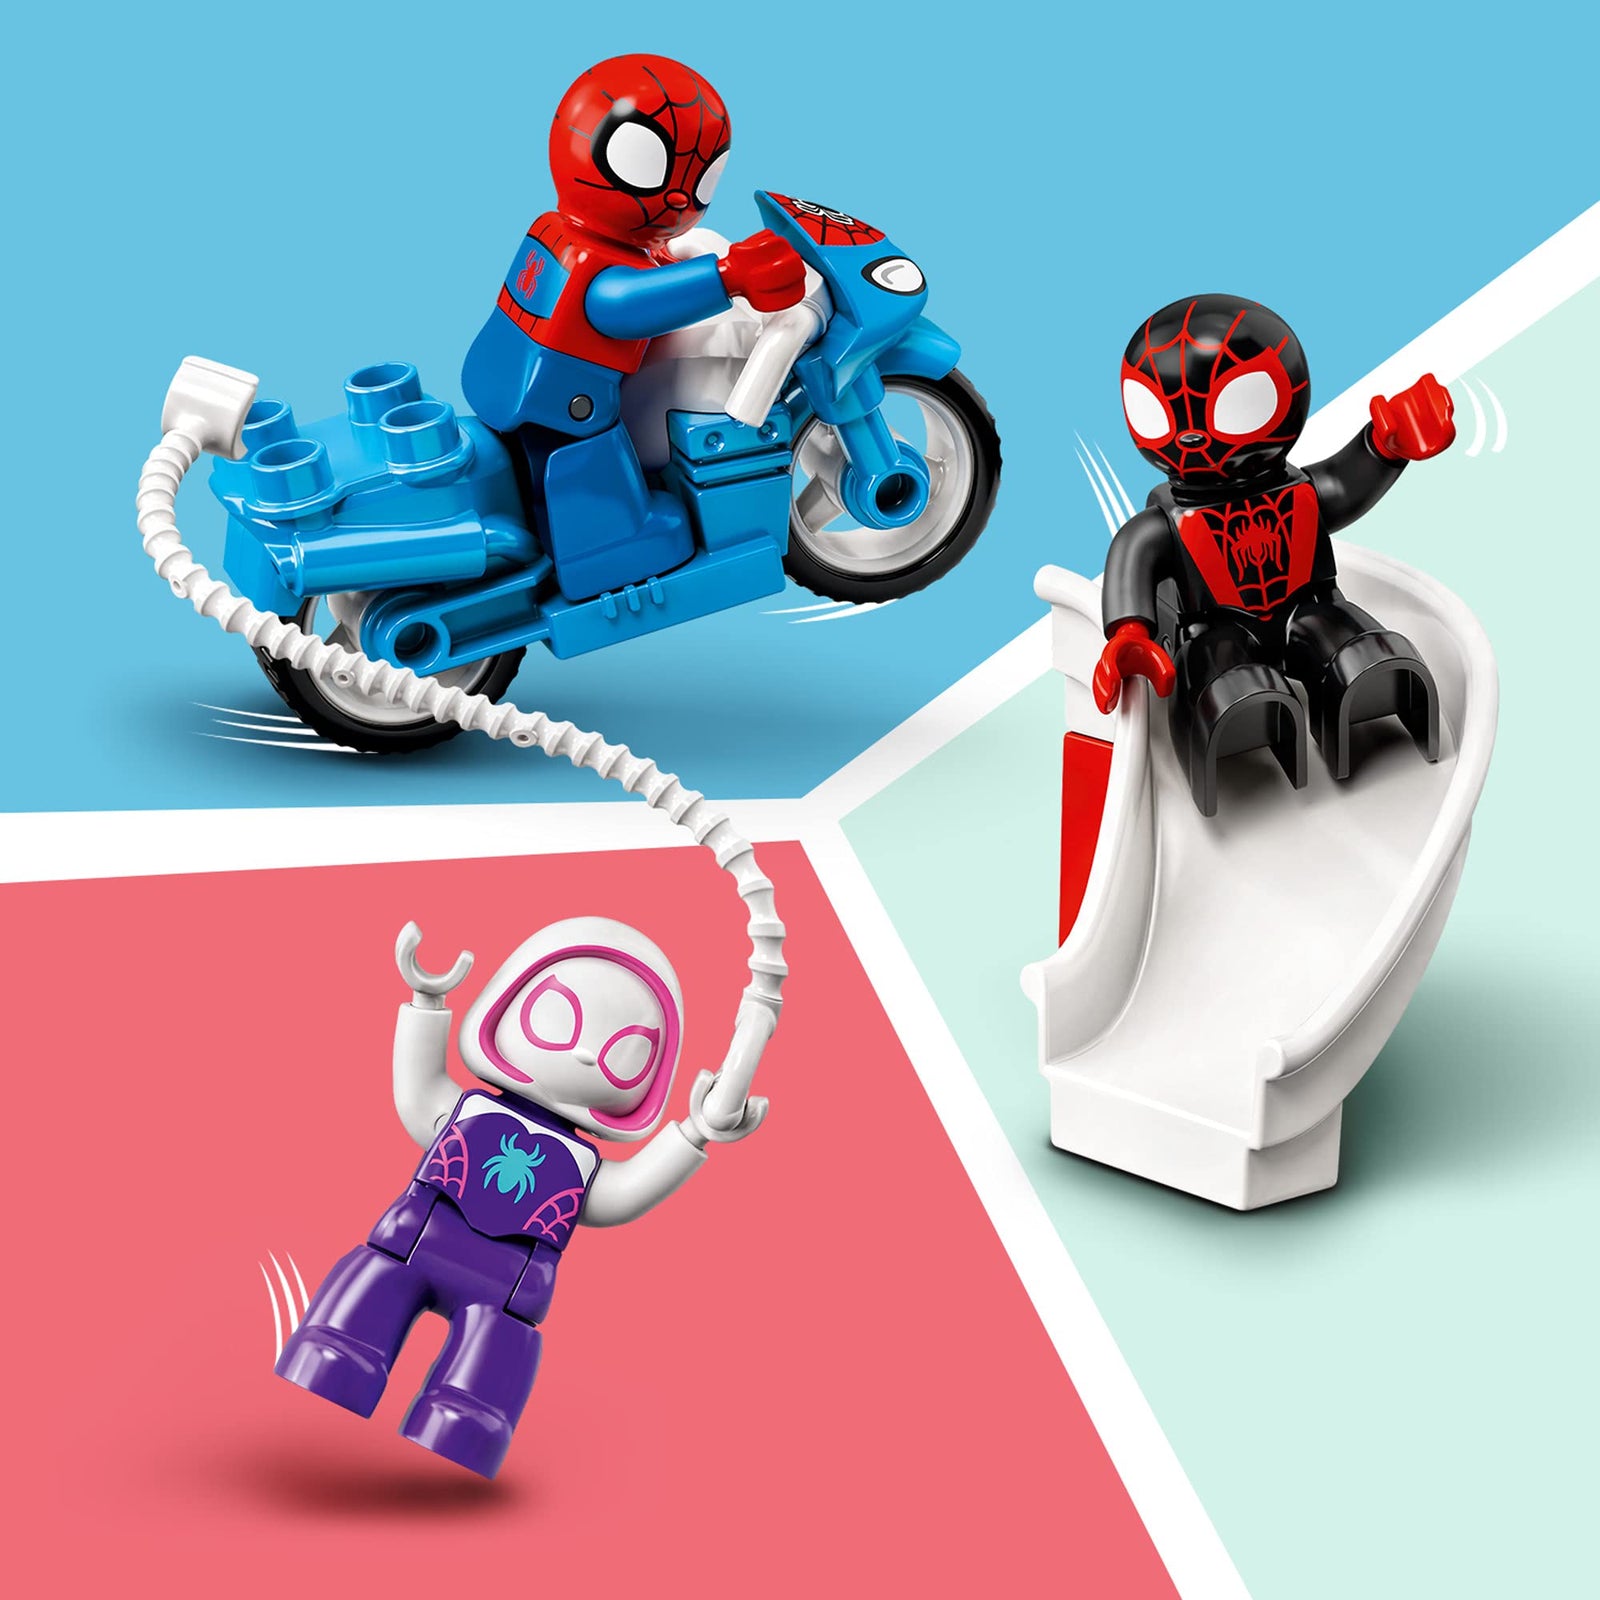 LEGO DUPLO Marvel Spider-Man Headquarters 10940 Spidey and His Amazing Friends TV Show Building Toy for Kids; New 2021 (36 Pieces)